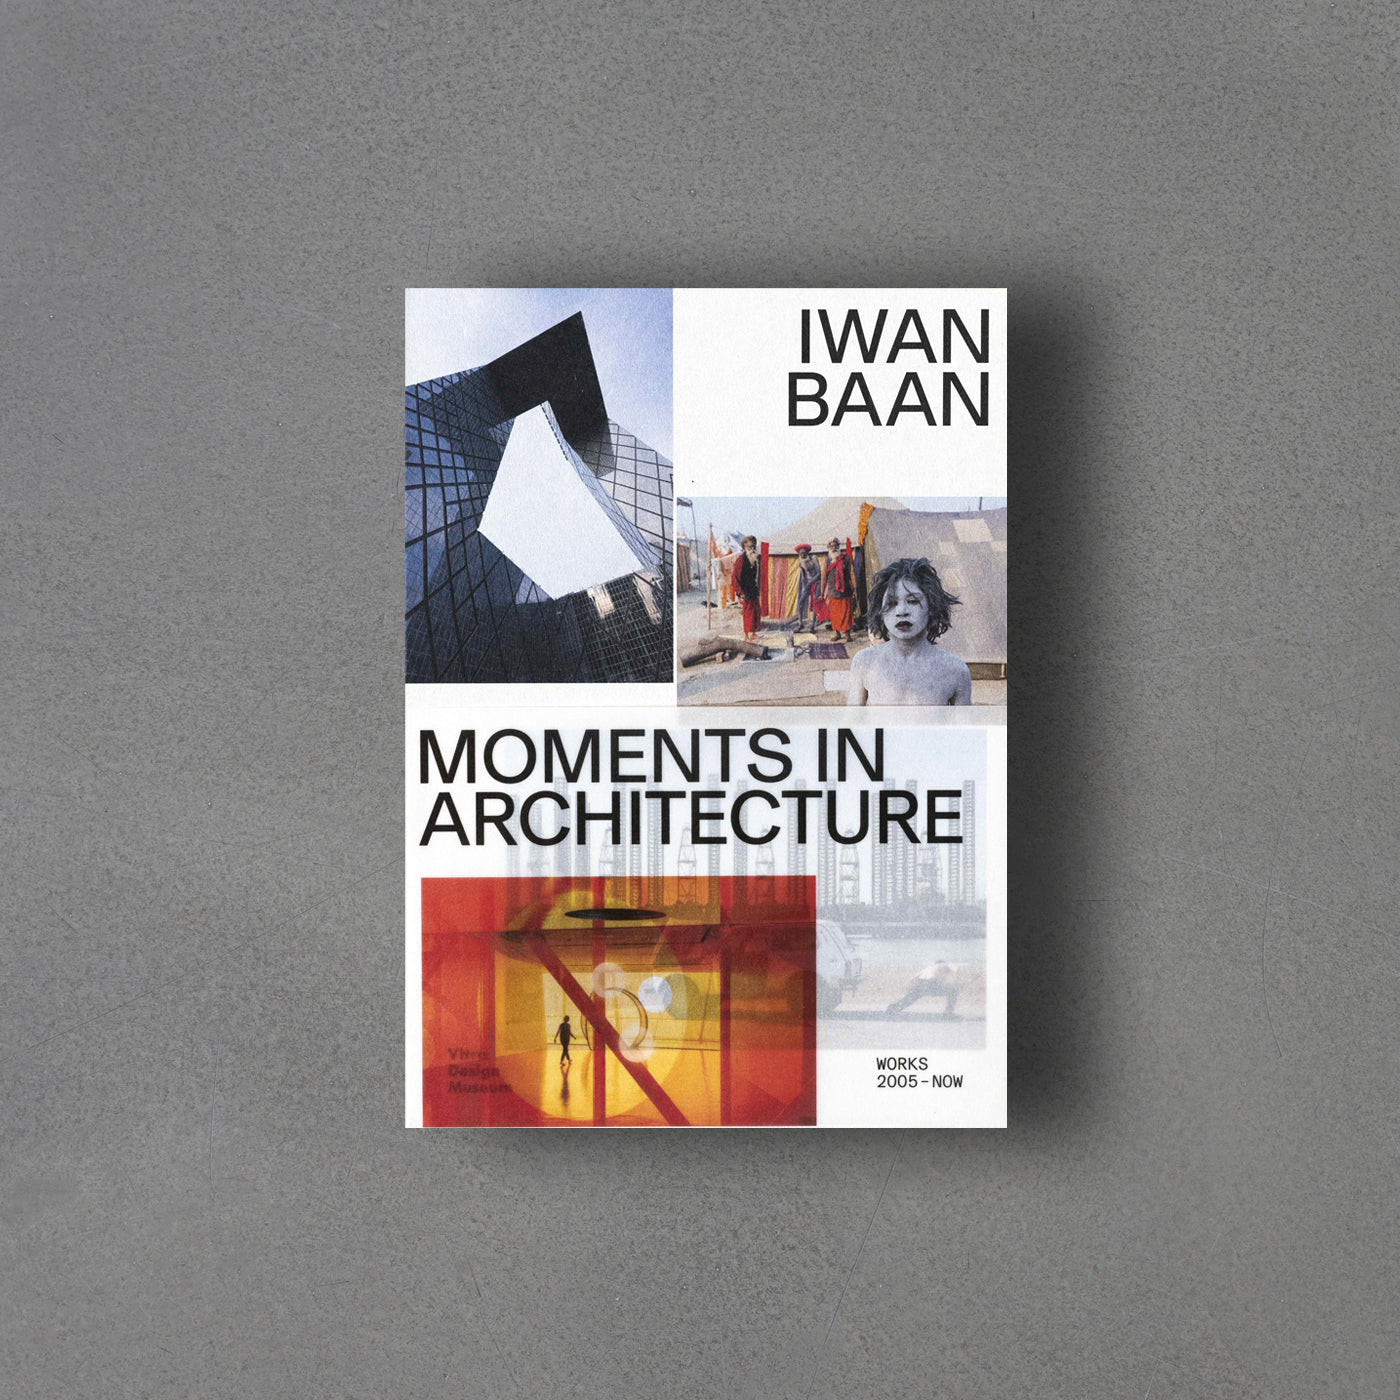 Iwan Baan - Moments in Architecture